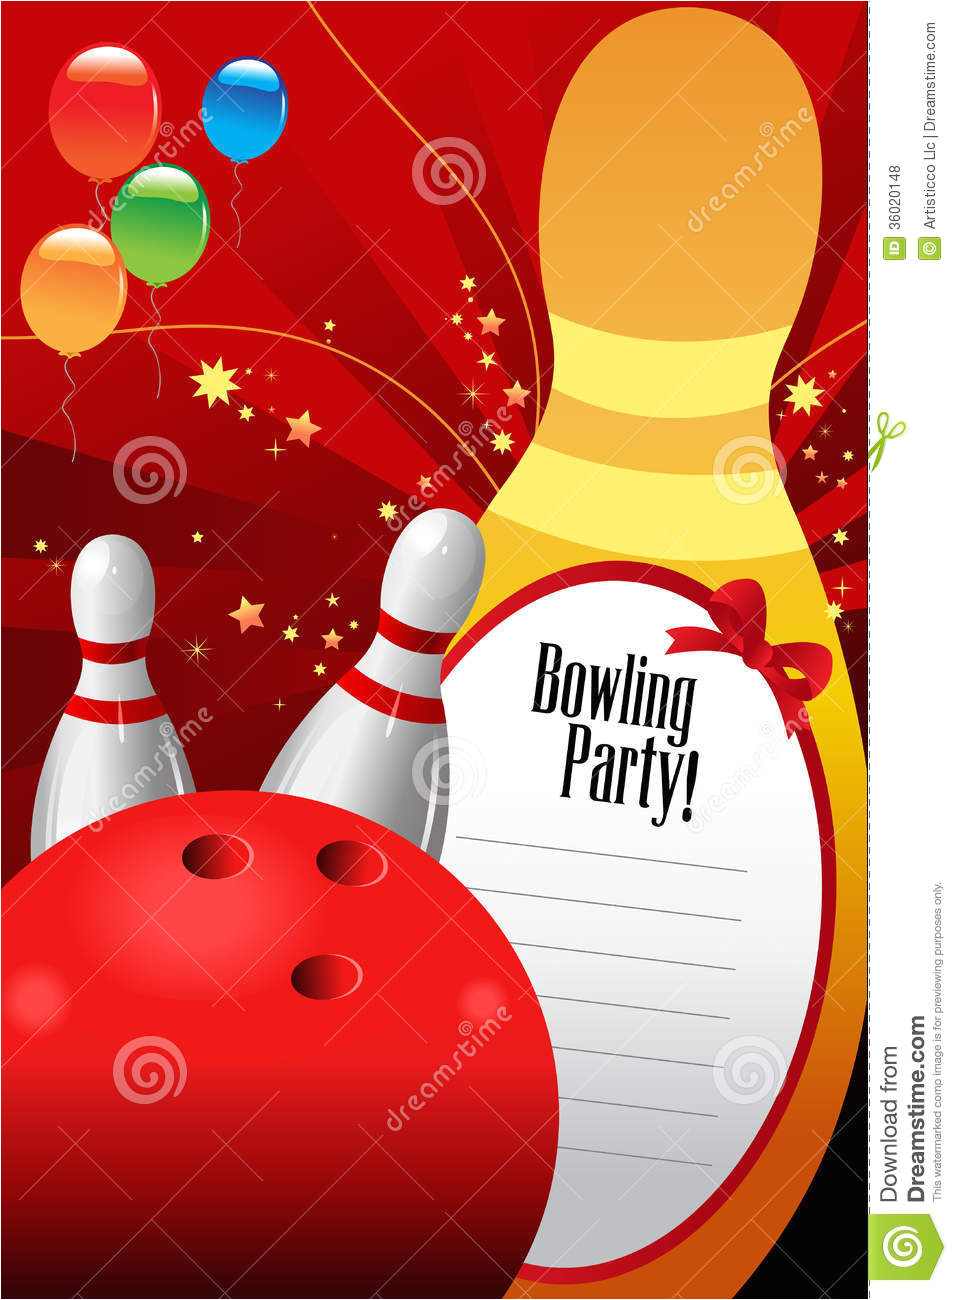 royalty free stock photos bowling party invitation template vector illustration image36020148